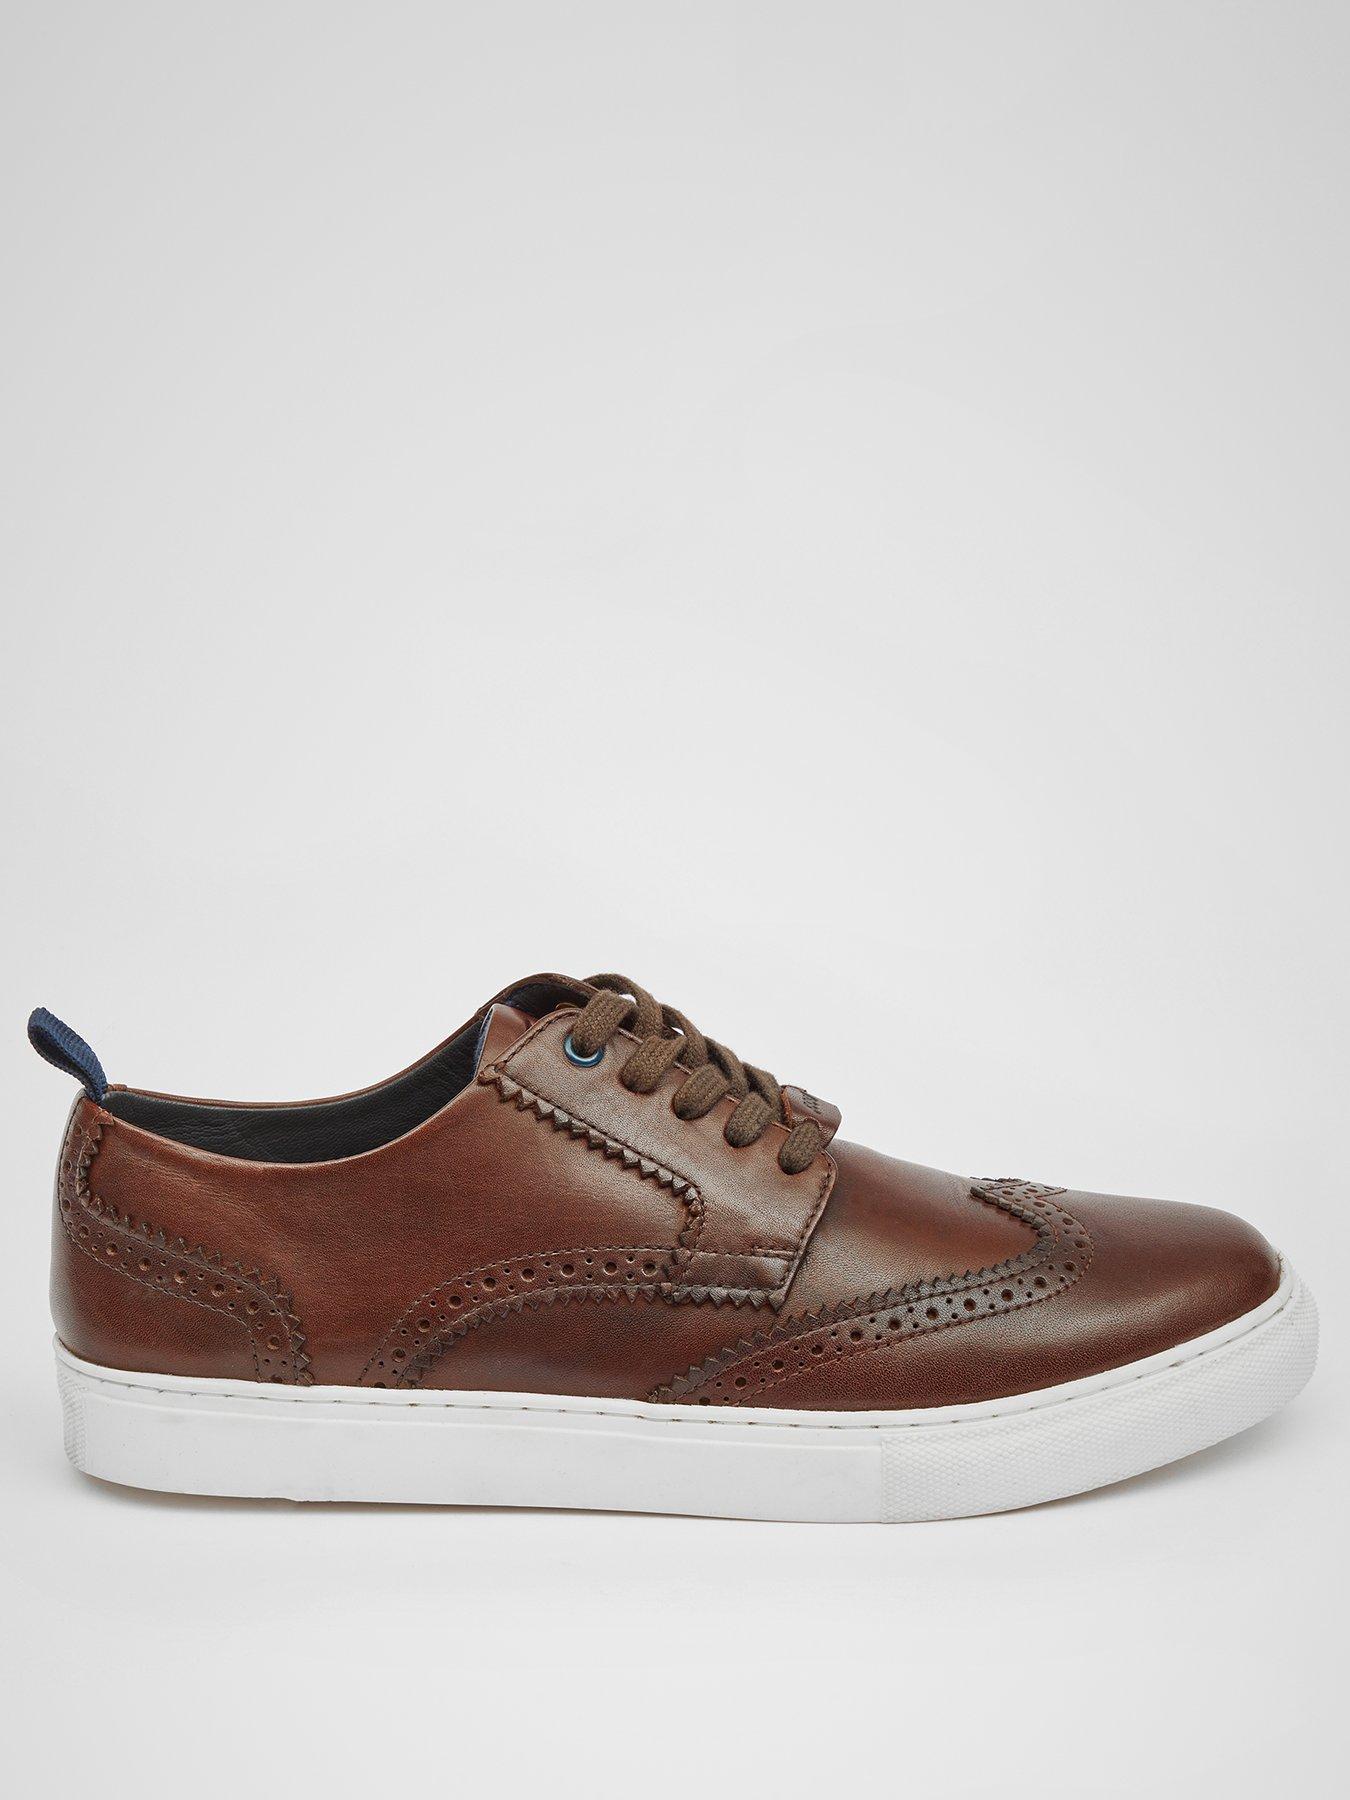  Foley Leather Lace Up Brogue Trainer - Dark Brown